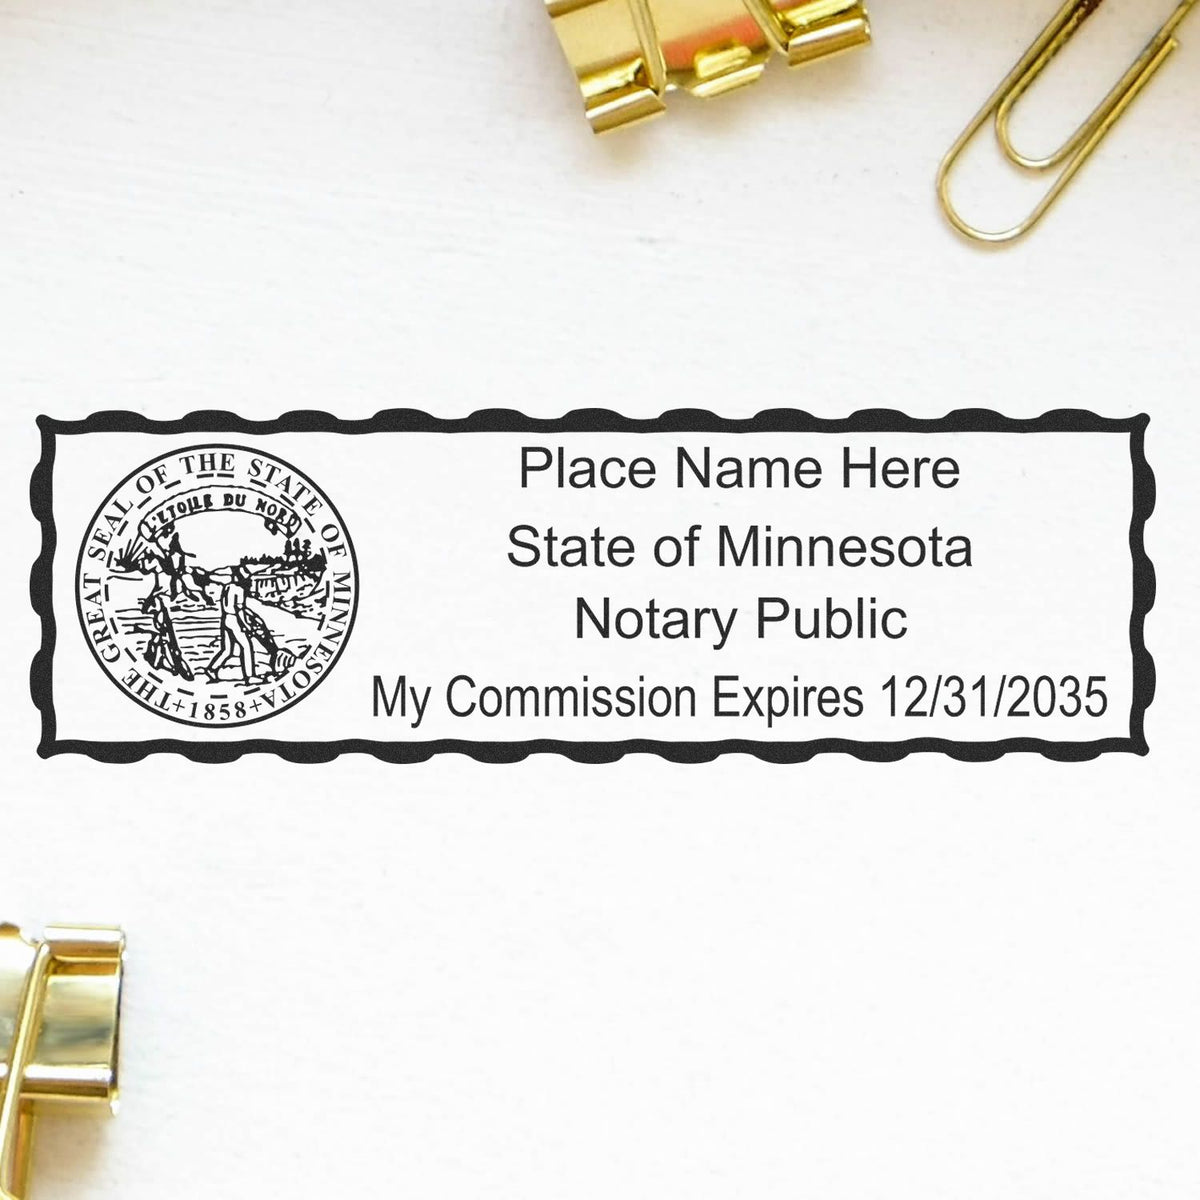 A lifestyle photo showing a stamped image of the Heavy-Duty Minnesota Rectangular Notary Stamp on a piece of paper